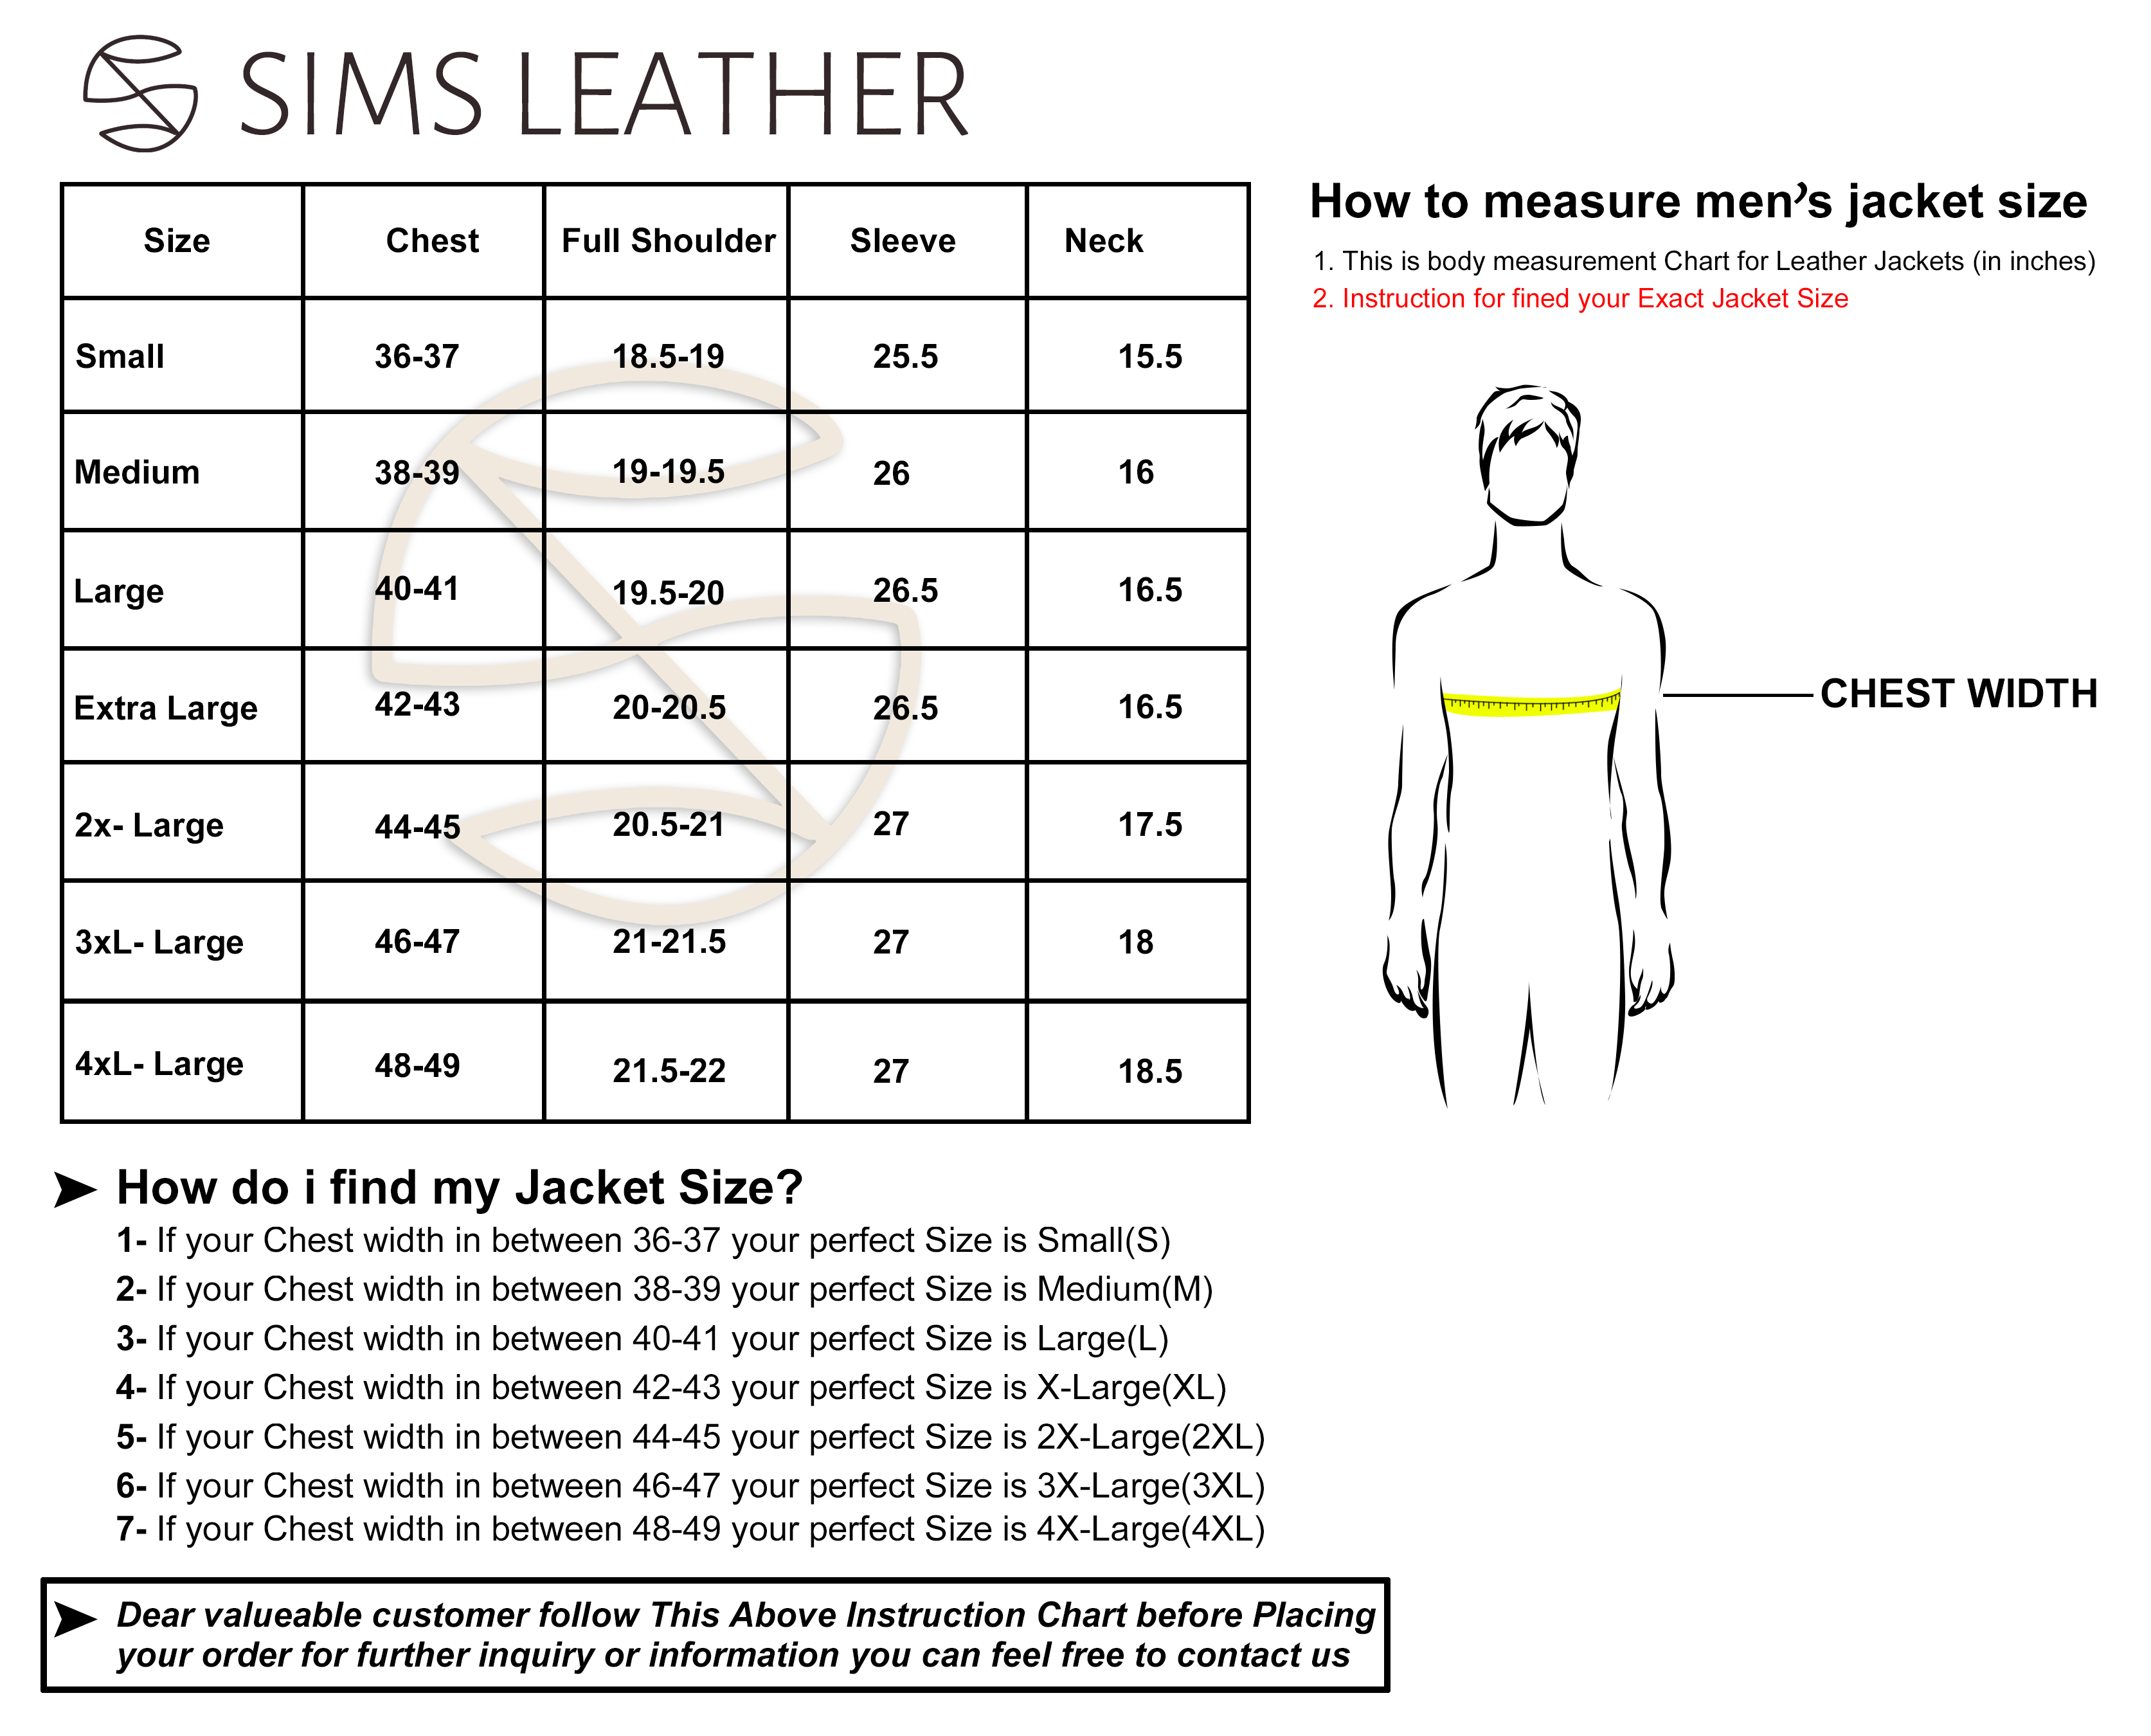 Sims Leather - The Ultimate Best Men's Leather Jackets Store